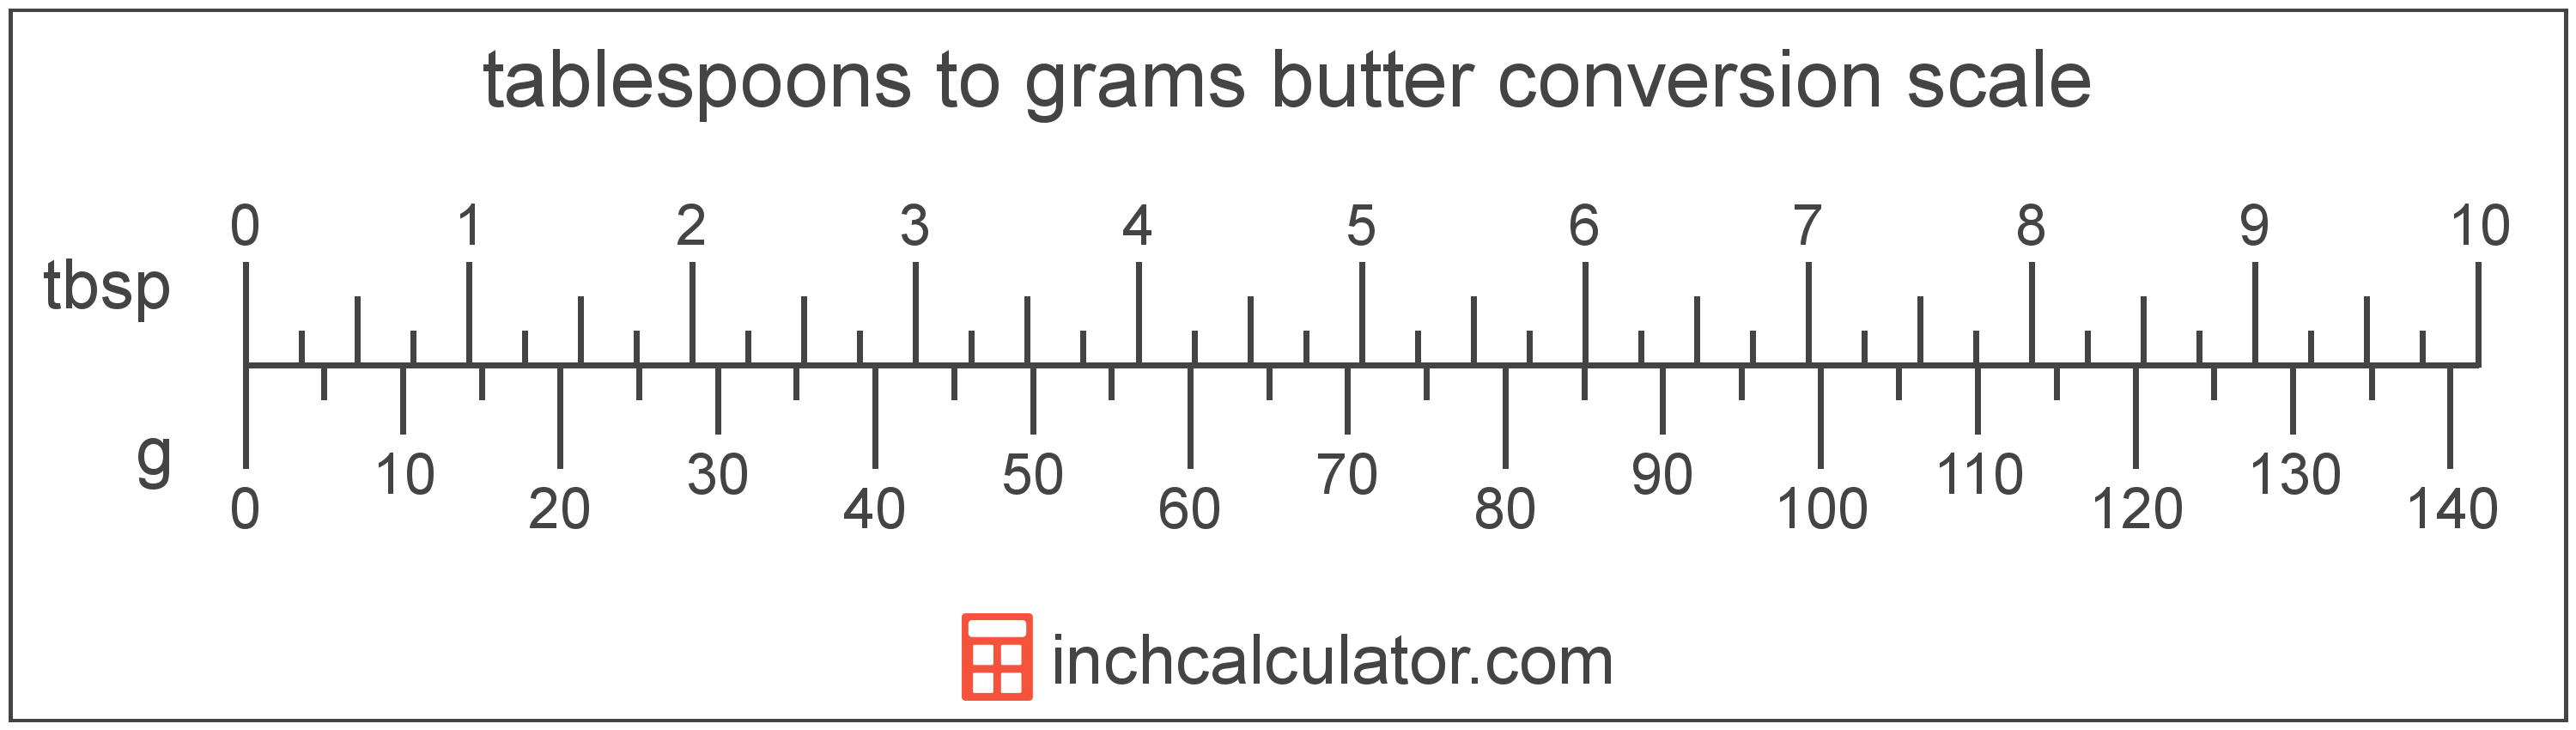 https://www.inchcalculator.com/a/img/unit-conversion/tablespoon-butter-to-gram-butter-conversion-scale.png